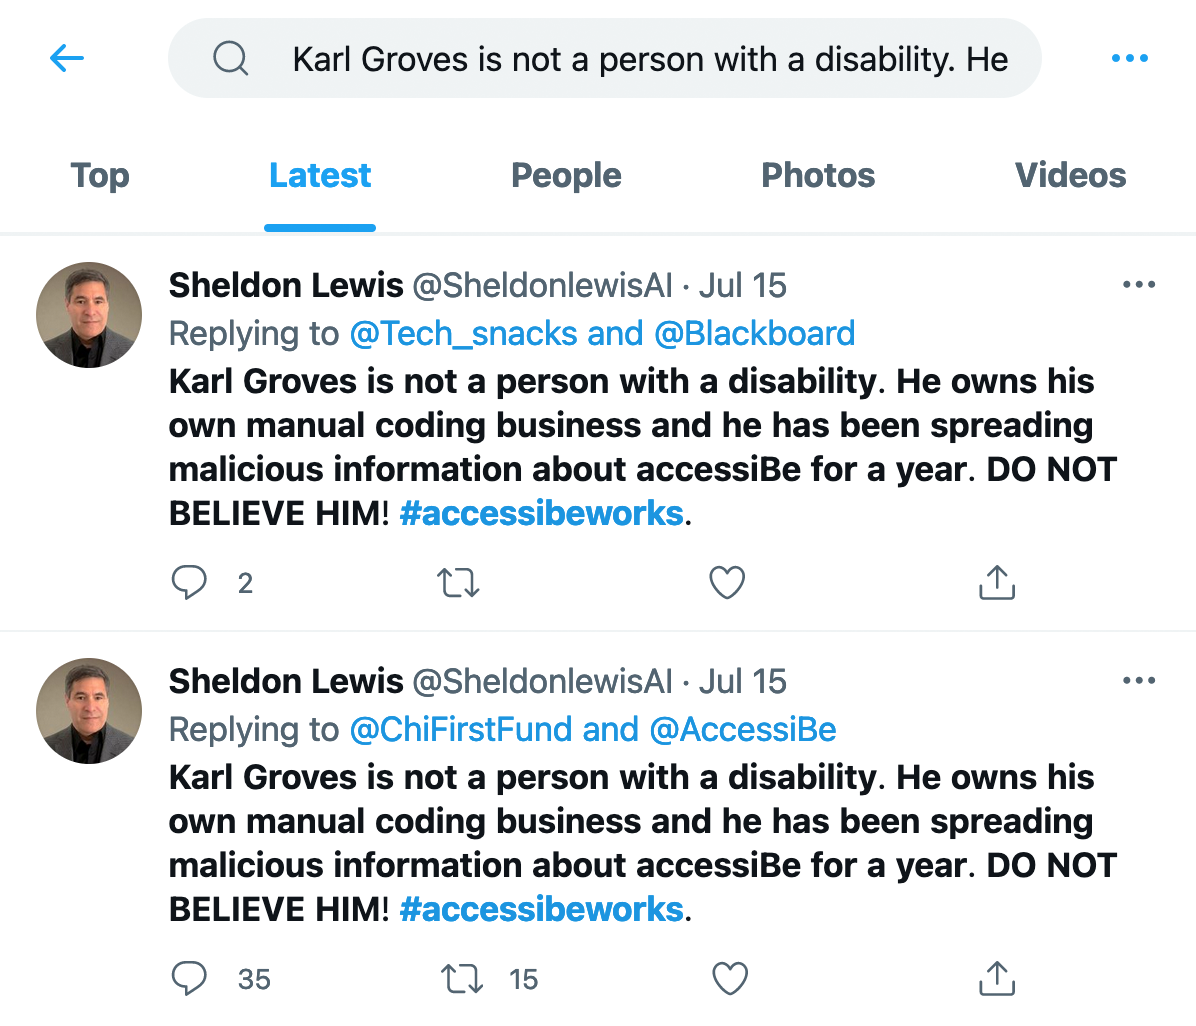 A Twitter search for the phrase, “Karl Groves is not a person with a disability. He owns his own manual coding business and he has been spreading malicious information about accessiBe for a year. DO NOT BELIEVE HIM! #accessibeworks.” There are two results, both by an account called Sheldon Lewis. Screenshot.